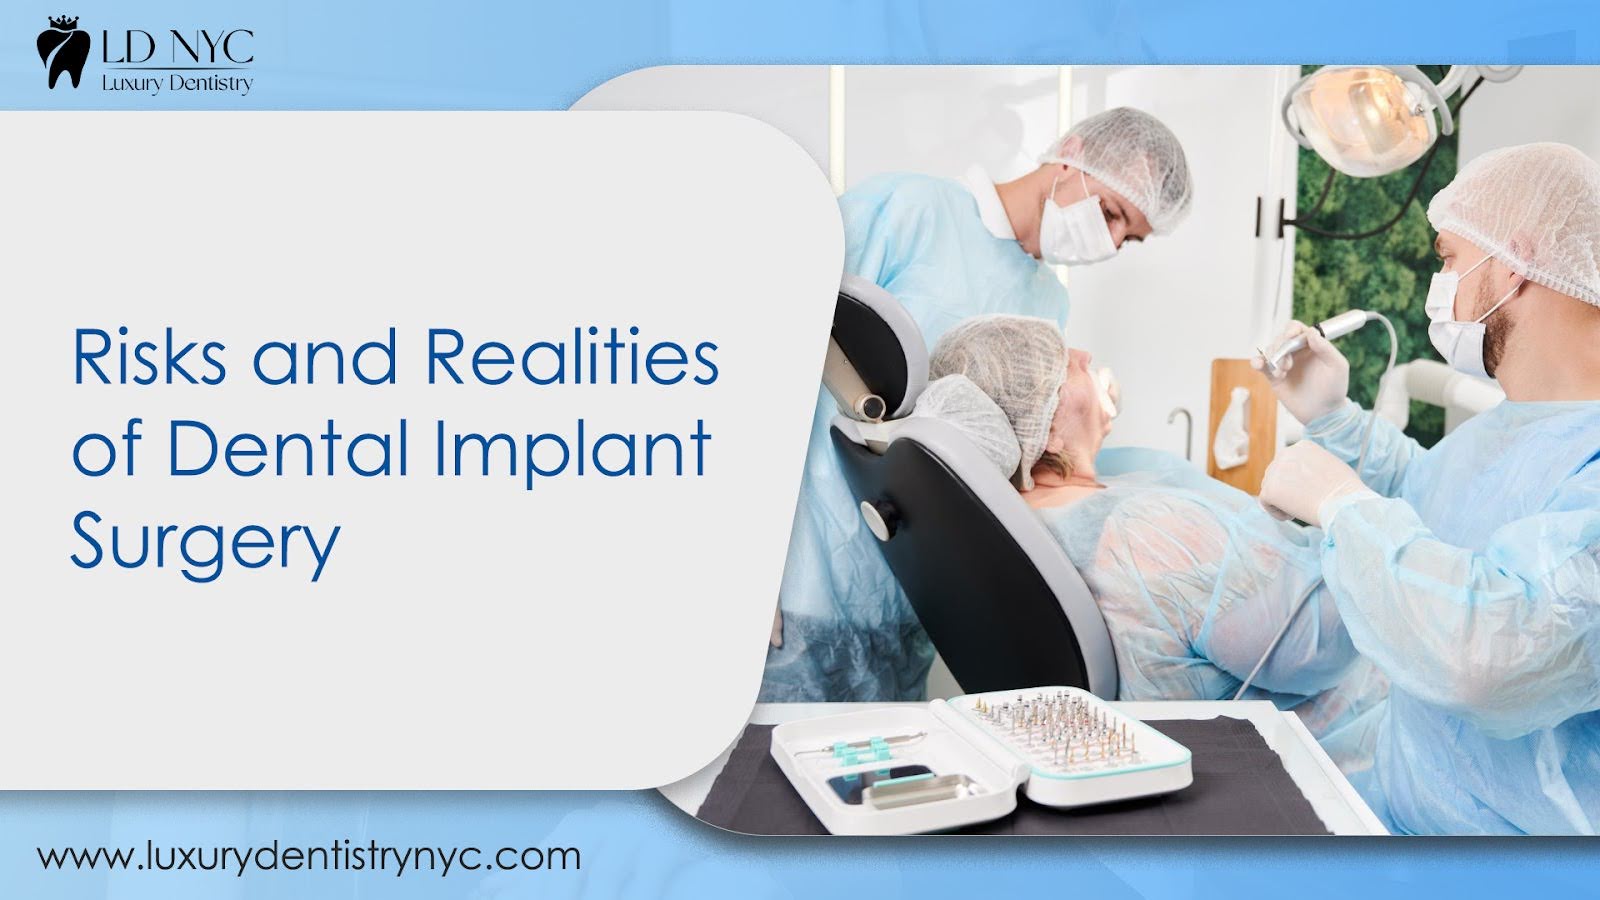 Risks and Realities of Dental Implant Surgery